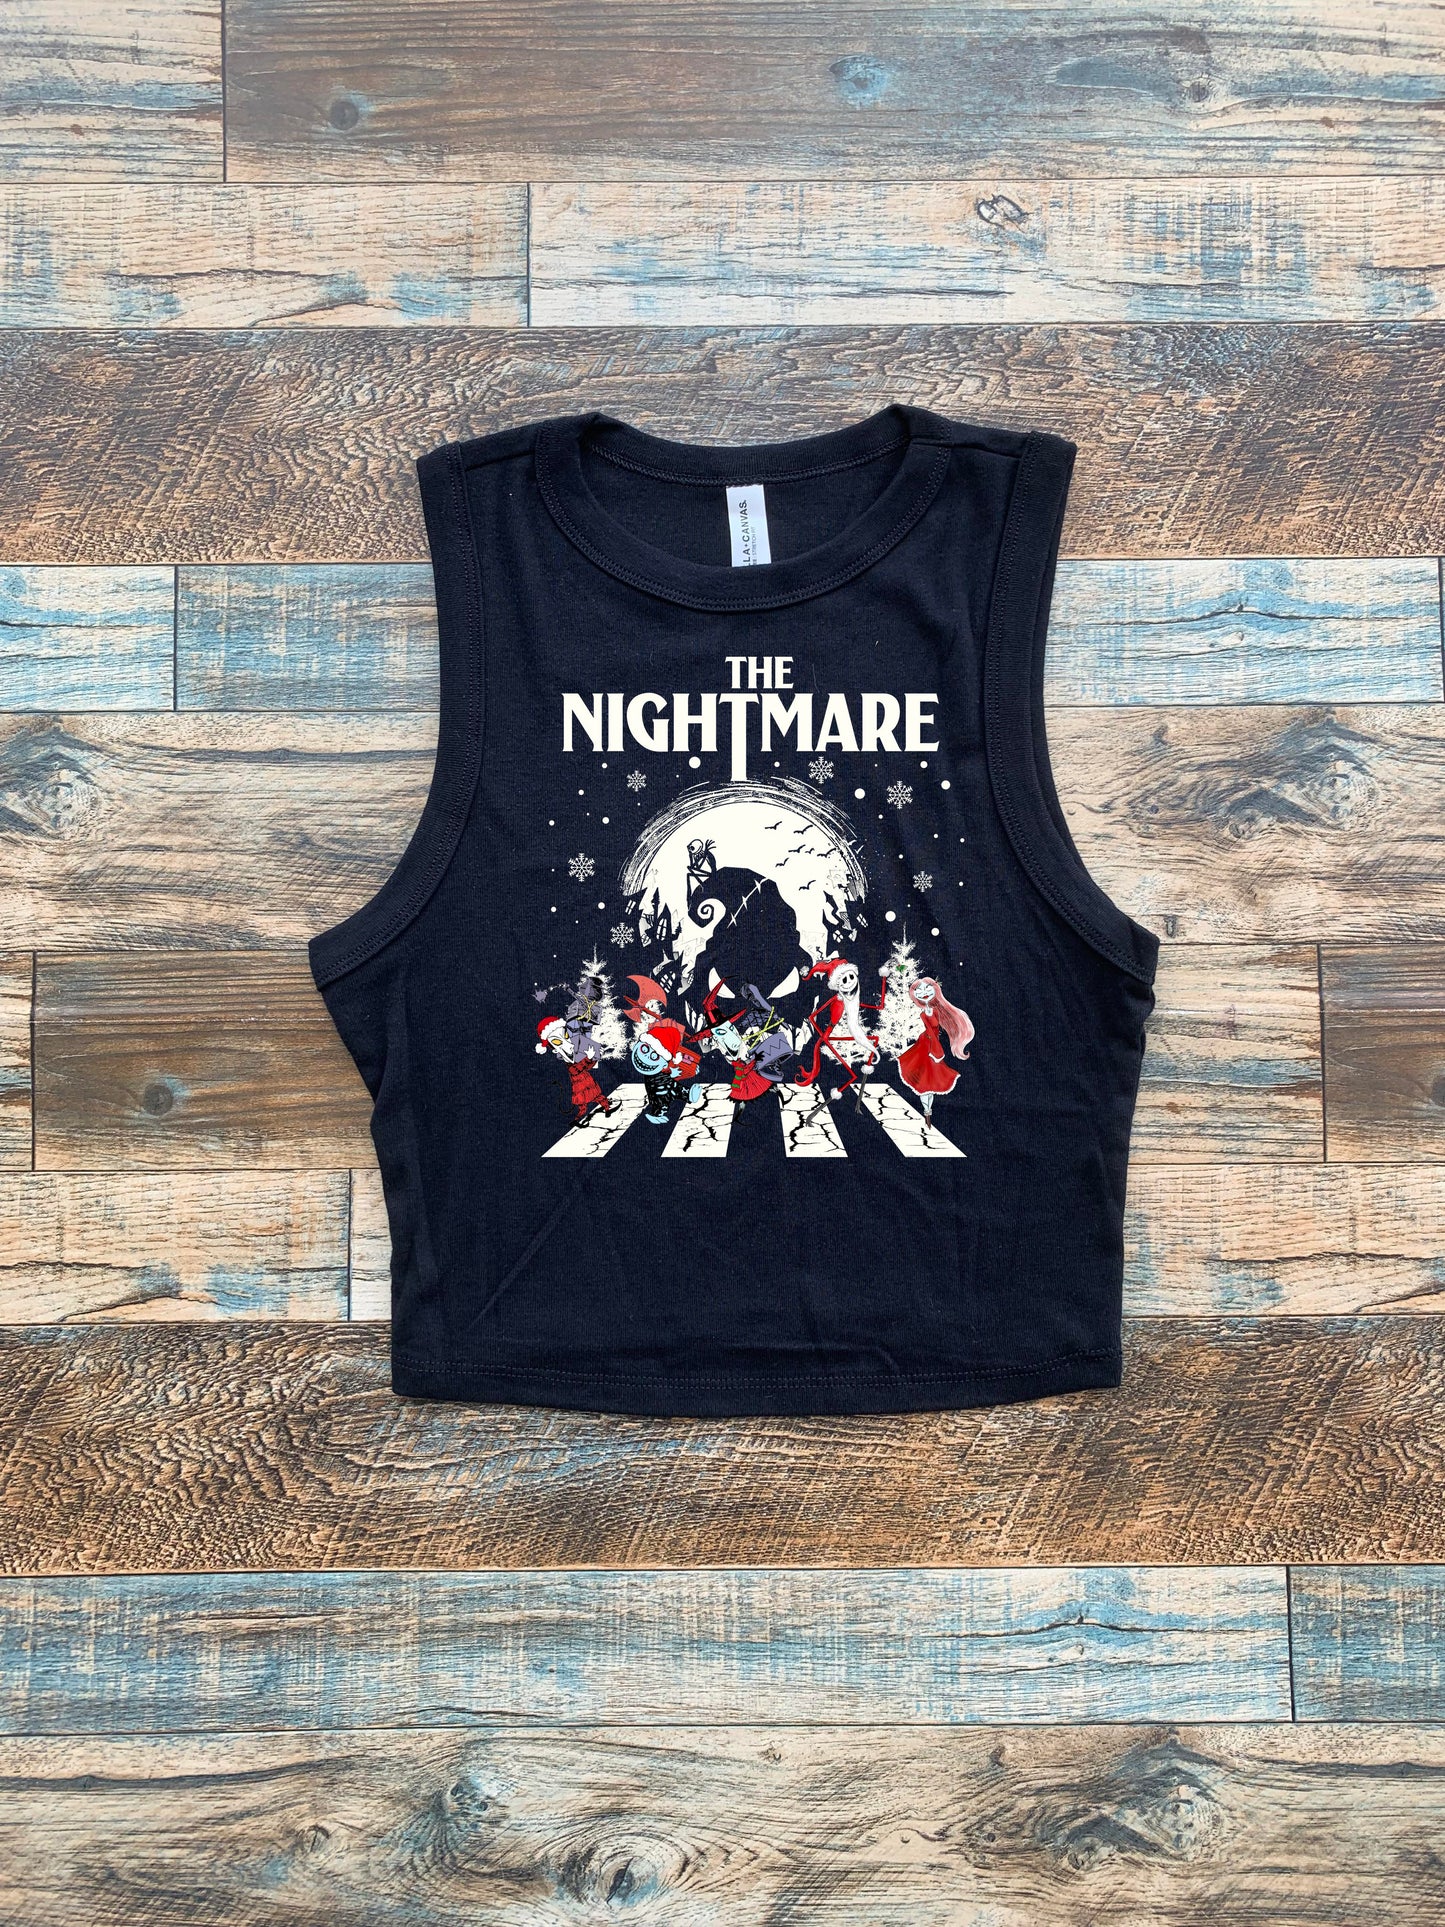 The Nightmare Christmas Crop and sweatpants